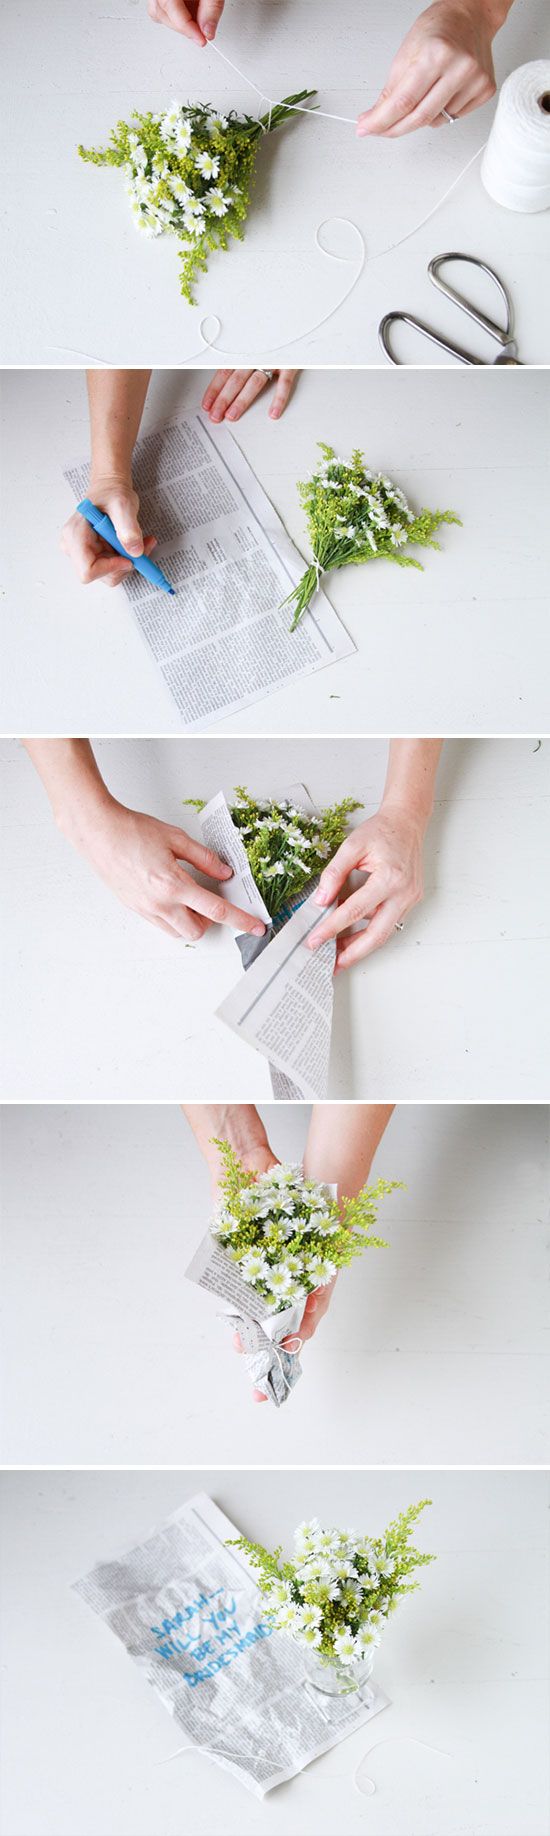 I think these bouquets would be cool alternatives to standard thank you cards, V...